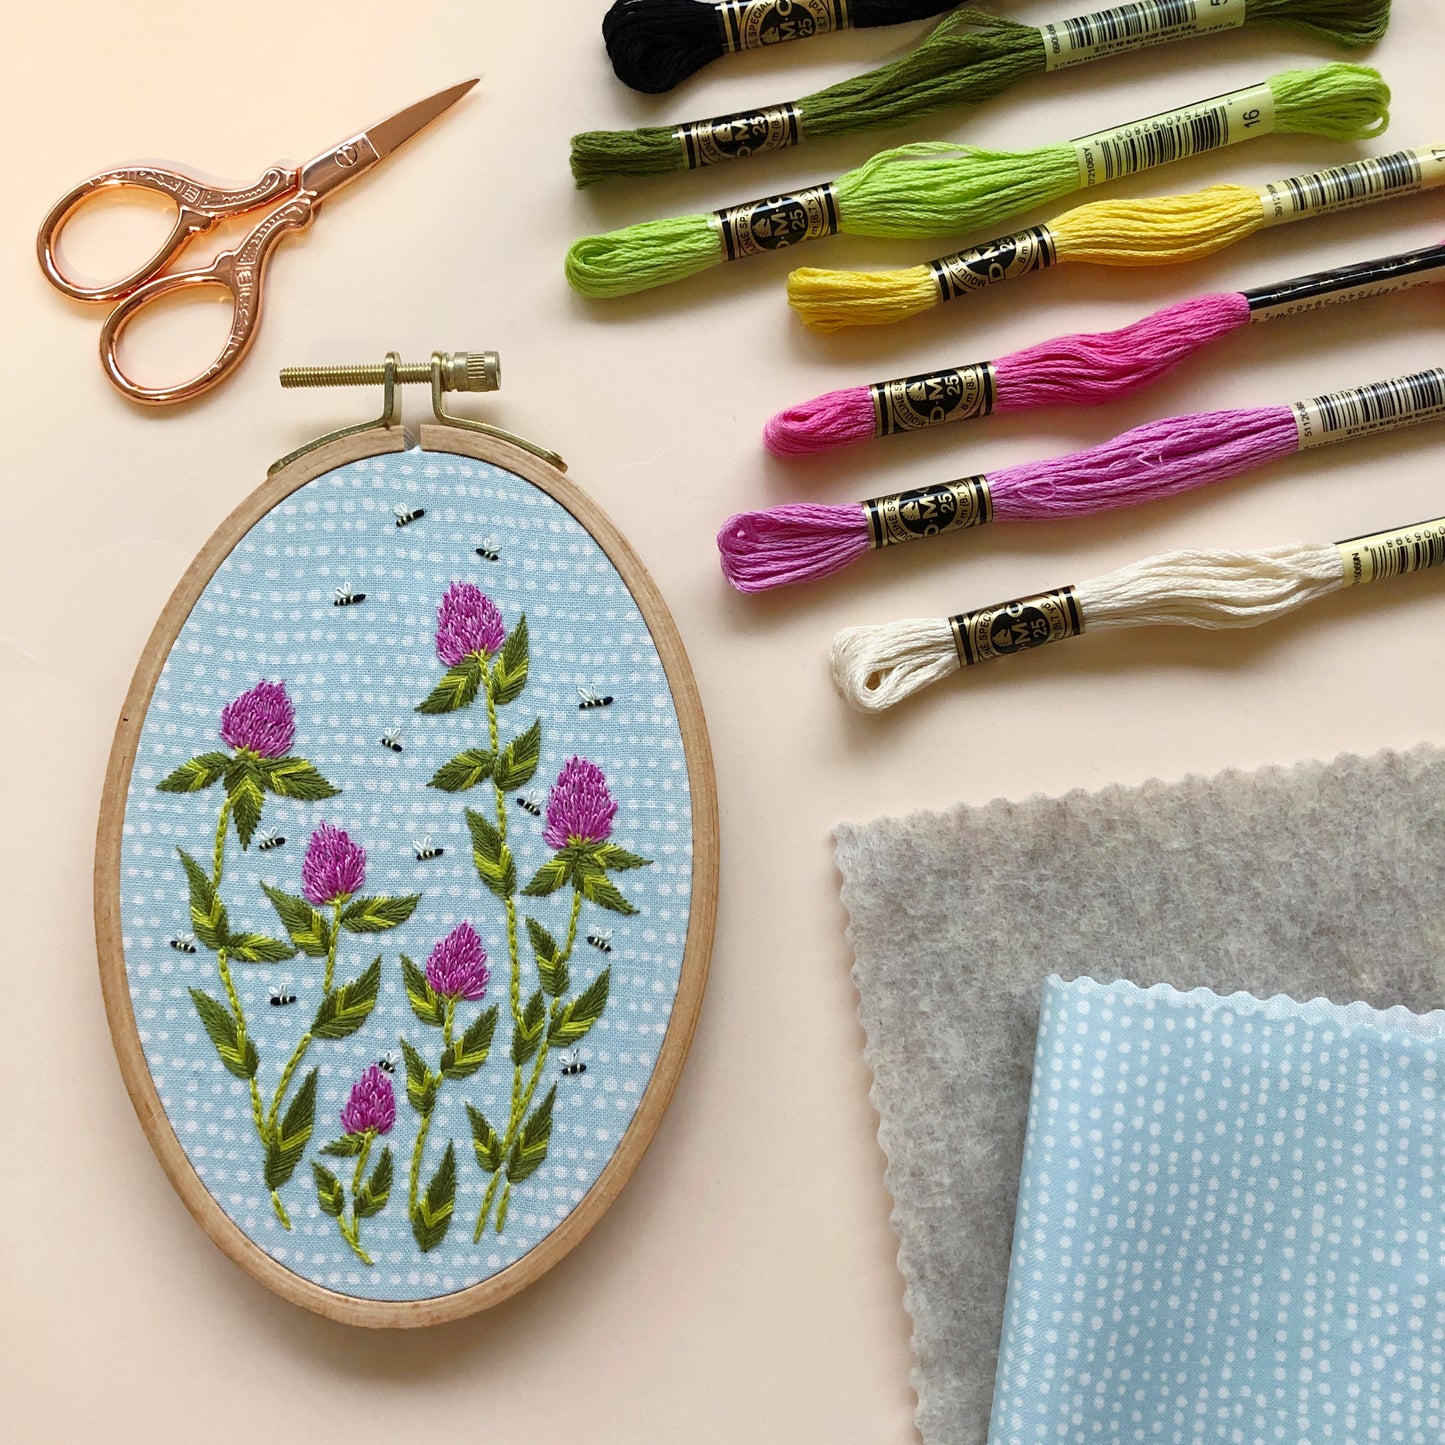 Bees Among Clover - Intermediate Hand Embroidery DIY Craft Kit